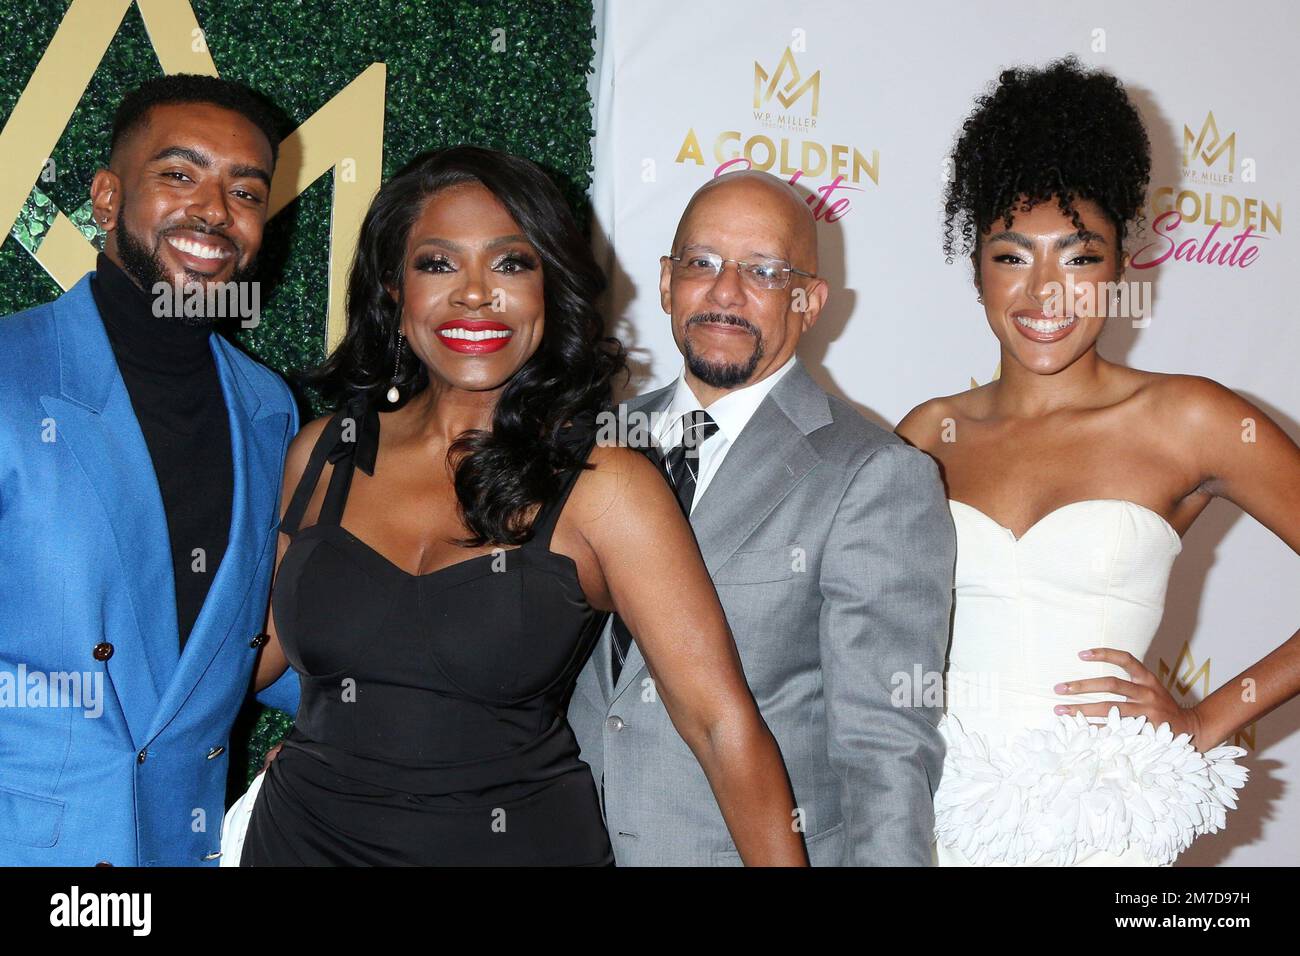 Marina Del Rey, CA. 8th Jan, 2023. Etienne Maurice, Sheryl Lee Ralph, Vincent Hughes, Ivy-Victoria Maurice at arrivals for A Golden Salute Honoring Golden Globe Nominees, Ritz Carlton Hotel, Marina Del Rey, CA January 8, 2023. Credit: Priscilla Grant/Everett Collection/Alamy Live News Stock Photo